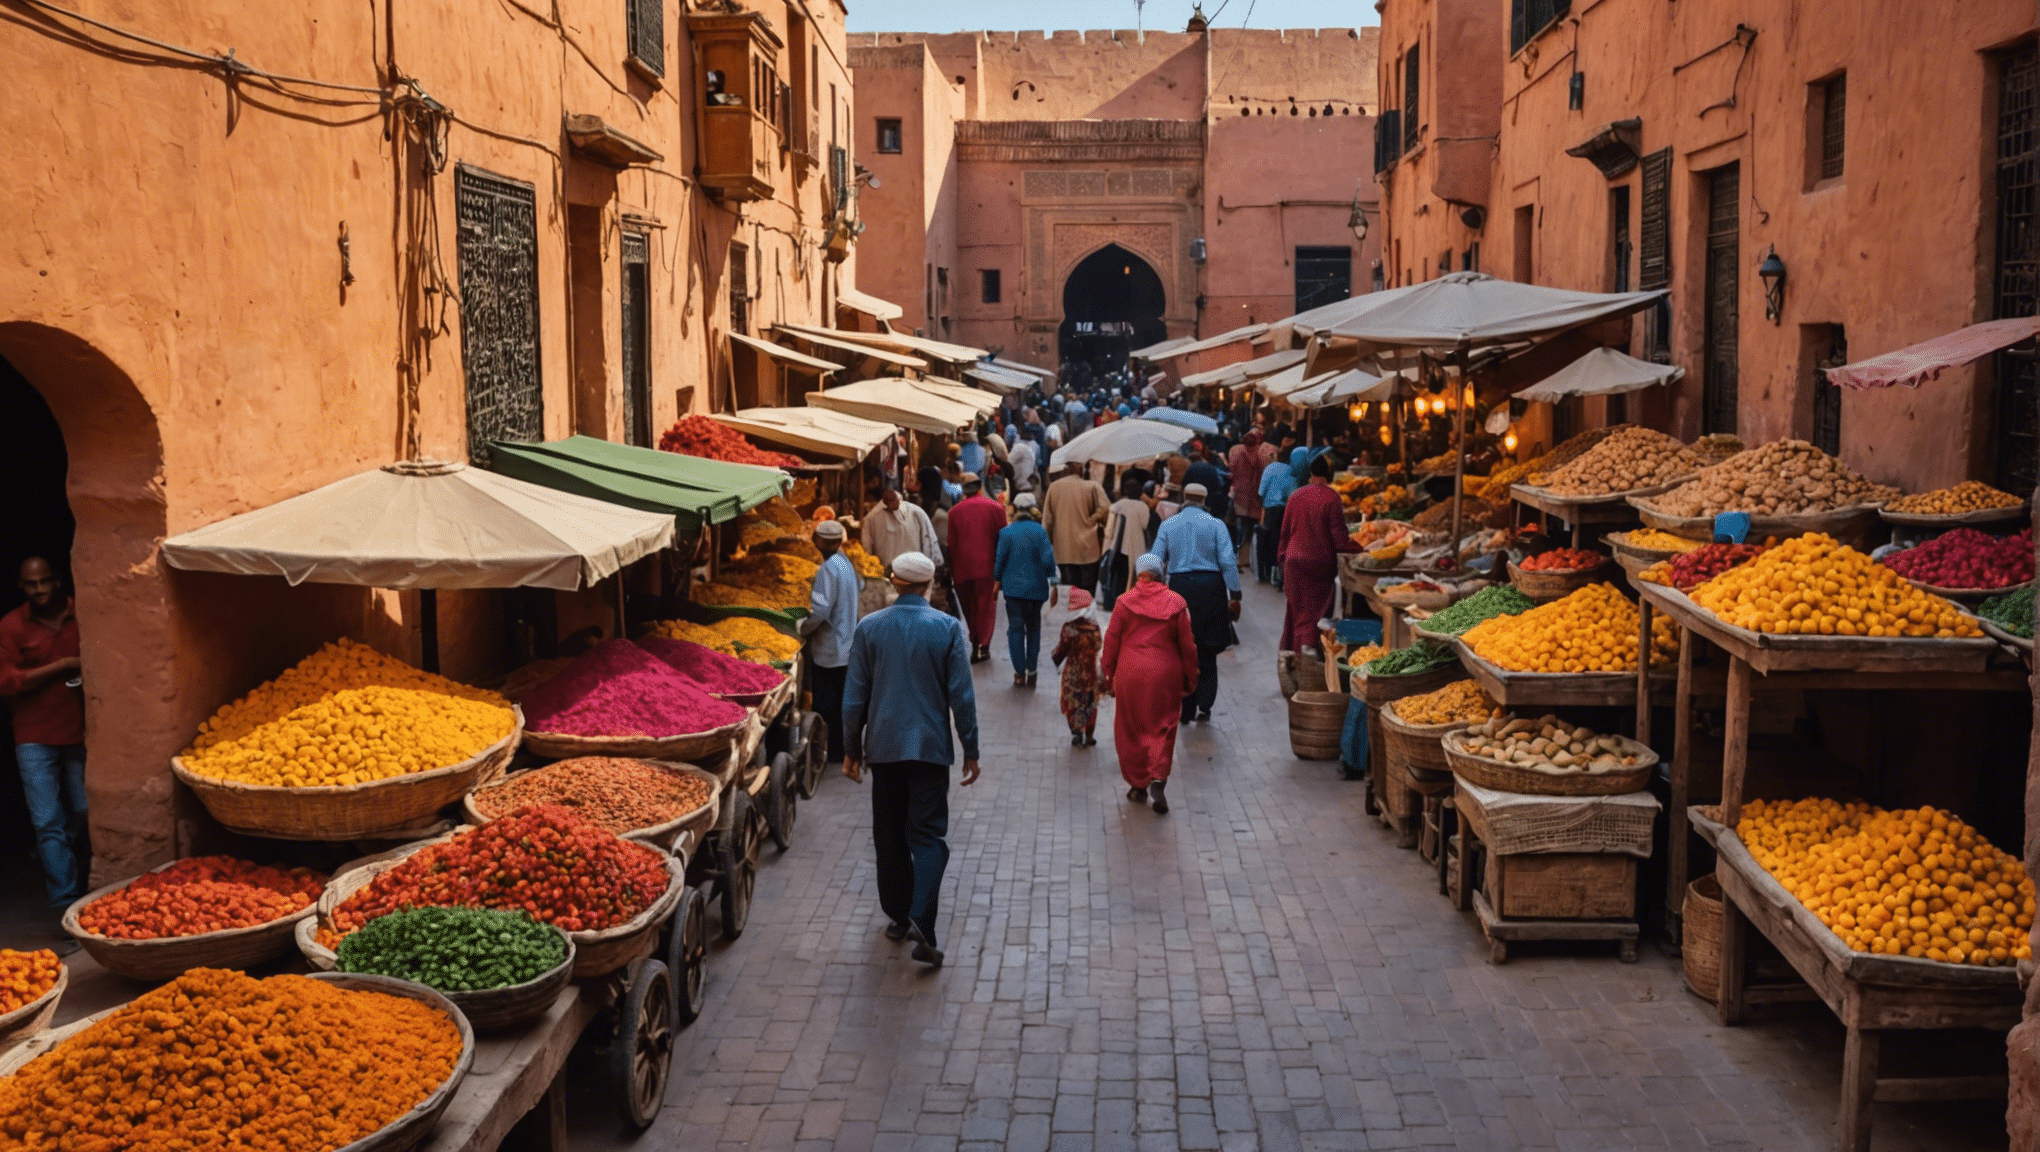 find out if it's hot in marrakech in september with our comprehensive guide to the weather during this time of year. plan your trip with confidence using our expert tips and advice.